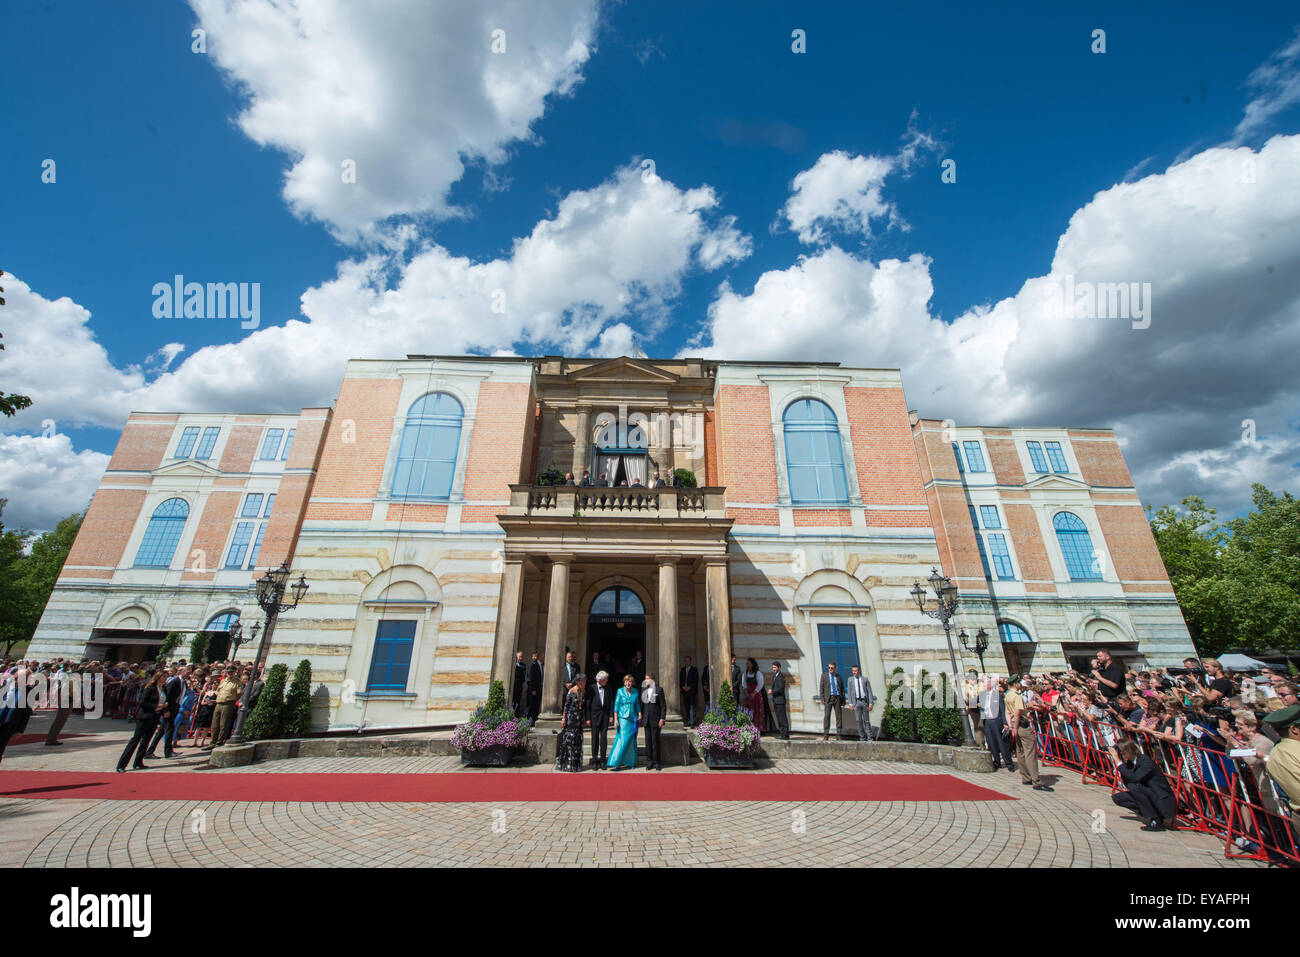 Bayreuth, Germany. 25th July, 2015. German Chancellor Angela Merkel (CDU, 3-L), her husband Joachim Sauer (R), Bayreuth's mayor Brigitte Merk-Erbe and husband Thomas Erbe (2-L) arrive for the opening of the 104th Bayreuth Festival at the Richard-Wagner-Festspielhaus (Bayreuth Festspielhaus), in Bayreuth, Germany, 25 July 2015. The Richard Wagner festival opens with the opera 'Tristan und Isolde' (Tristan and Iseult) and runs until 28 August. Photo: ARMIN WEIGEL/dpa/Alamy Live News Stock Photo